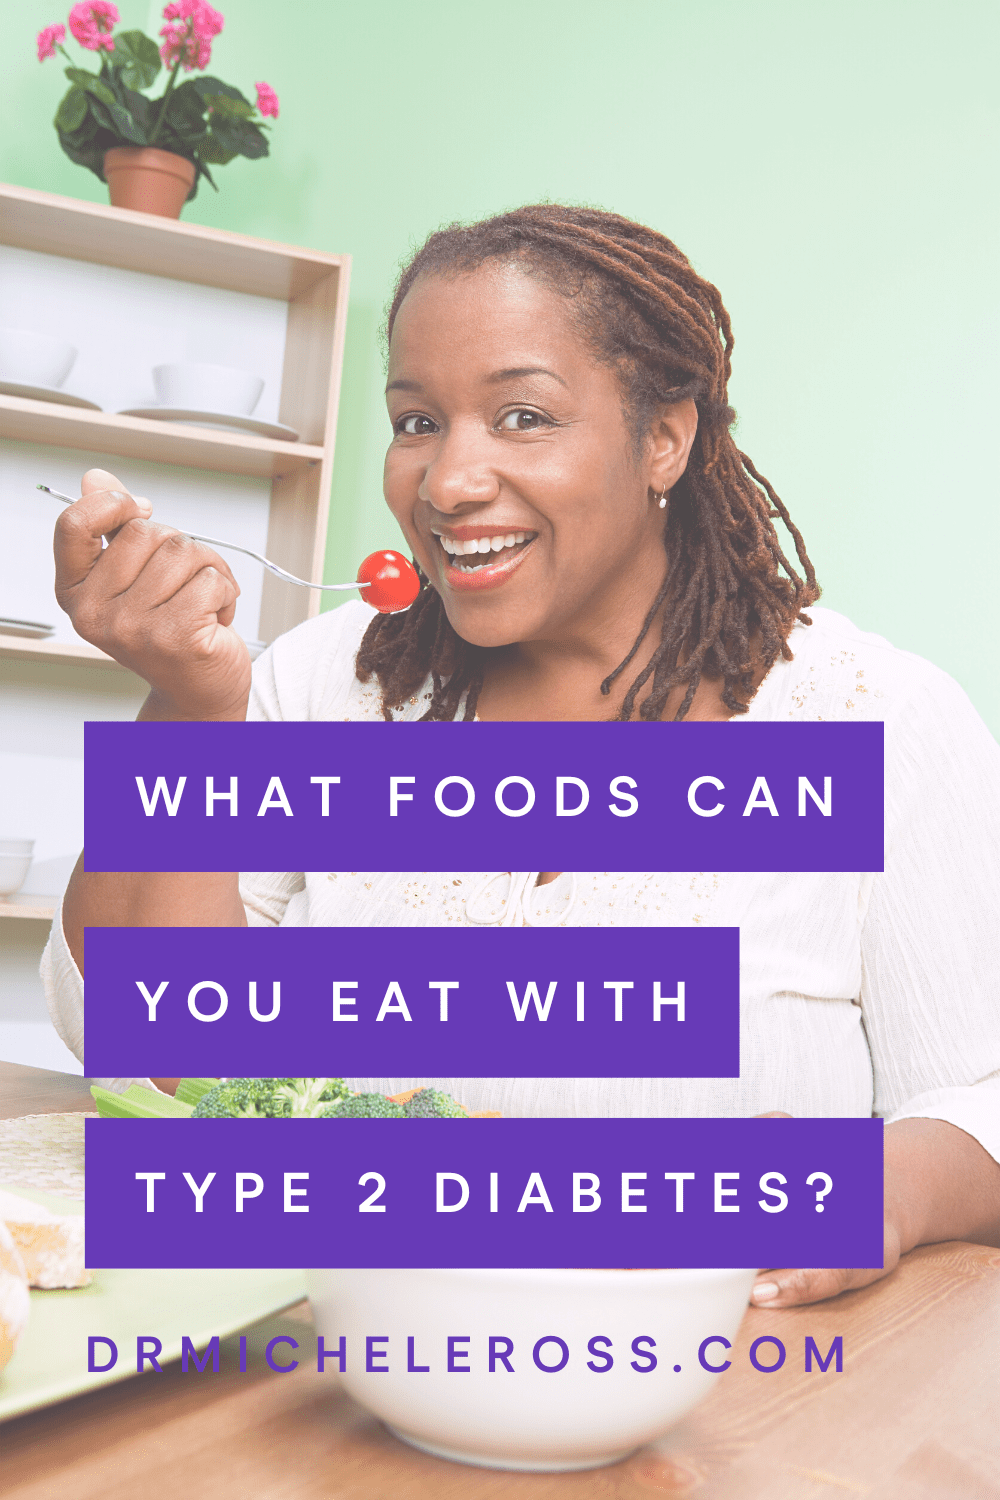 What Foods Can You Eat With Type 2 Diabetes?